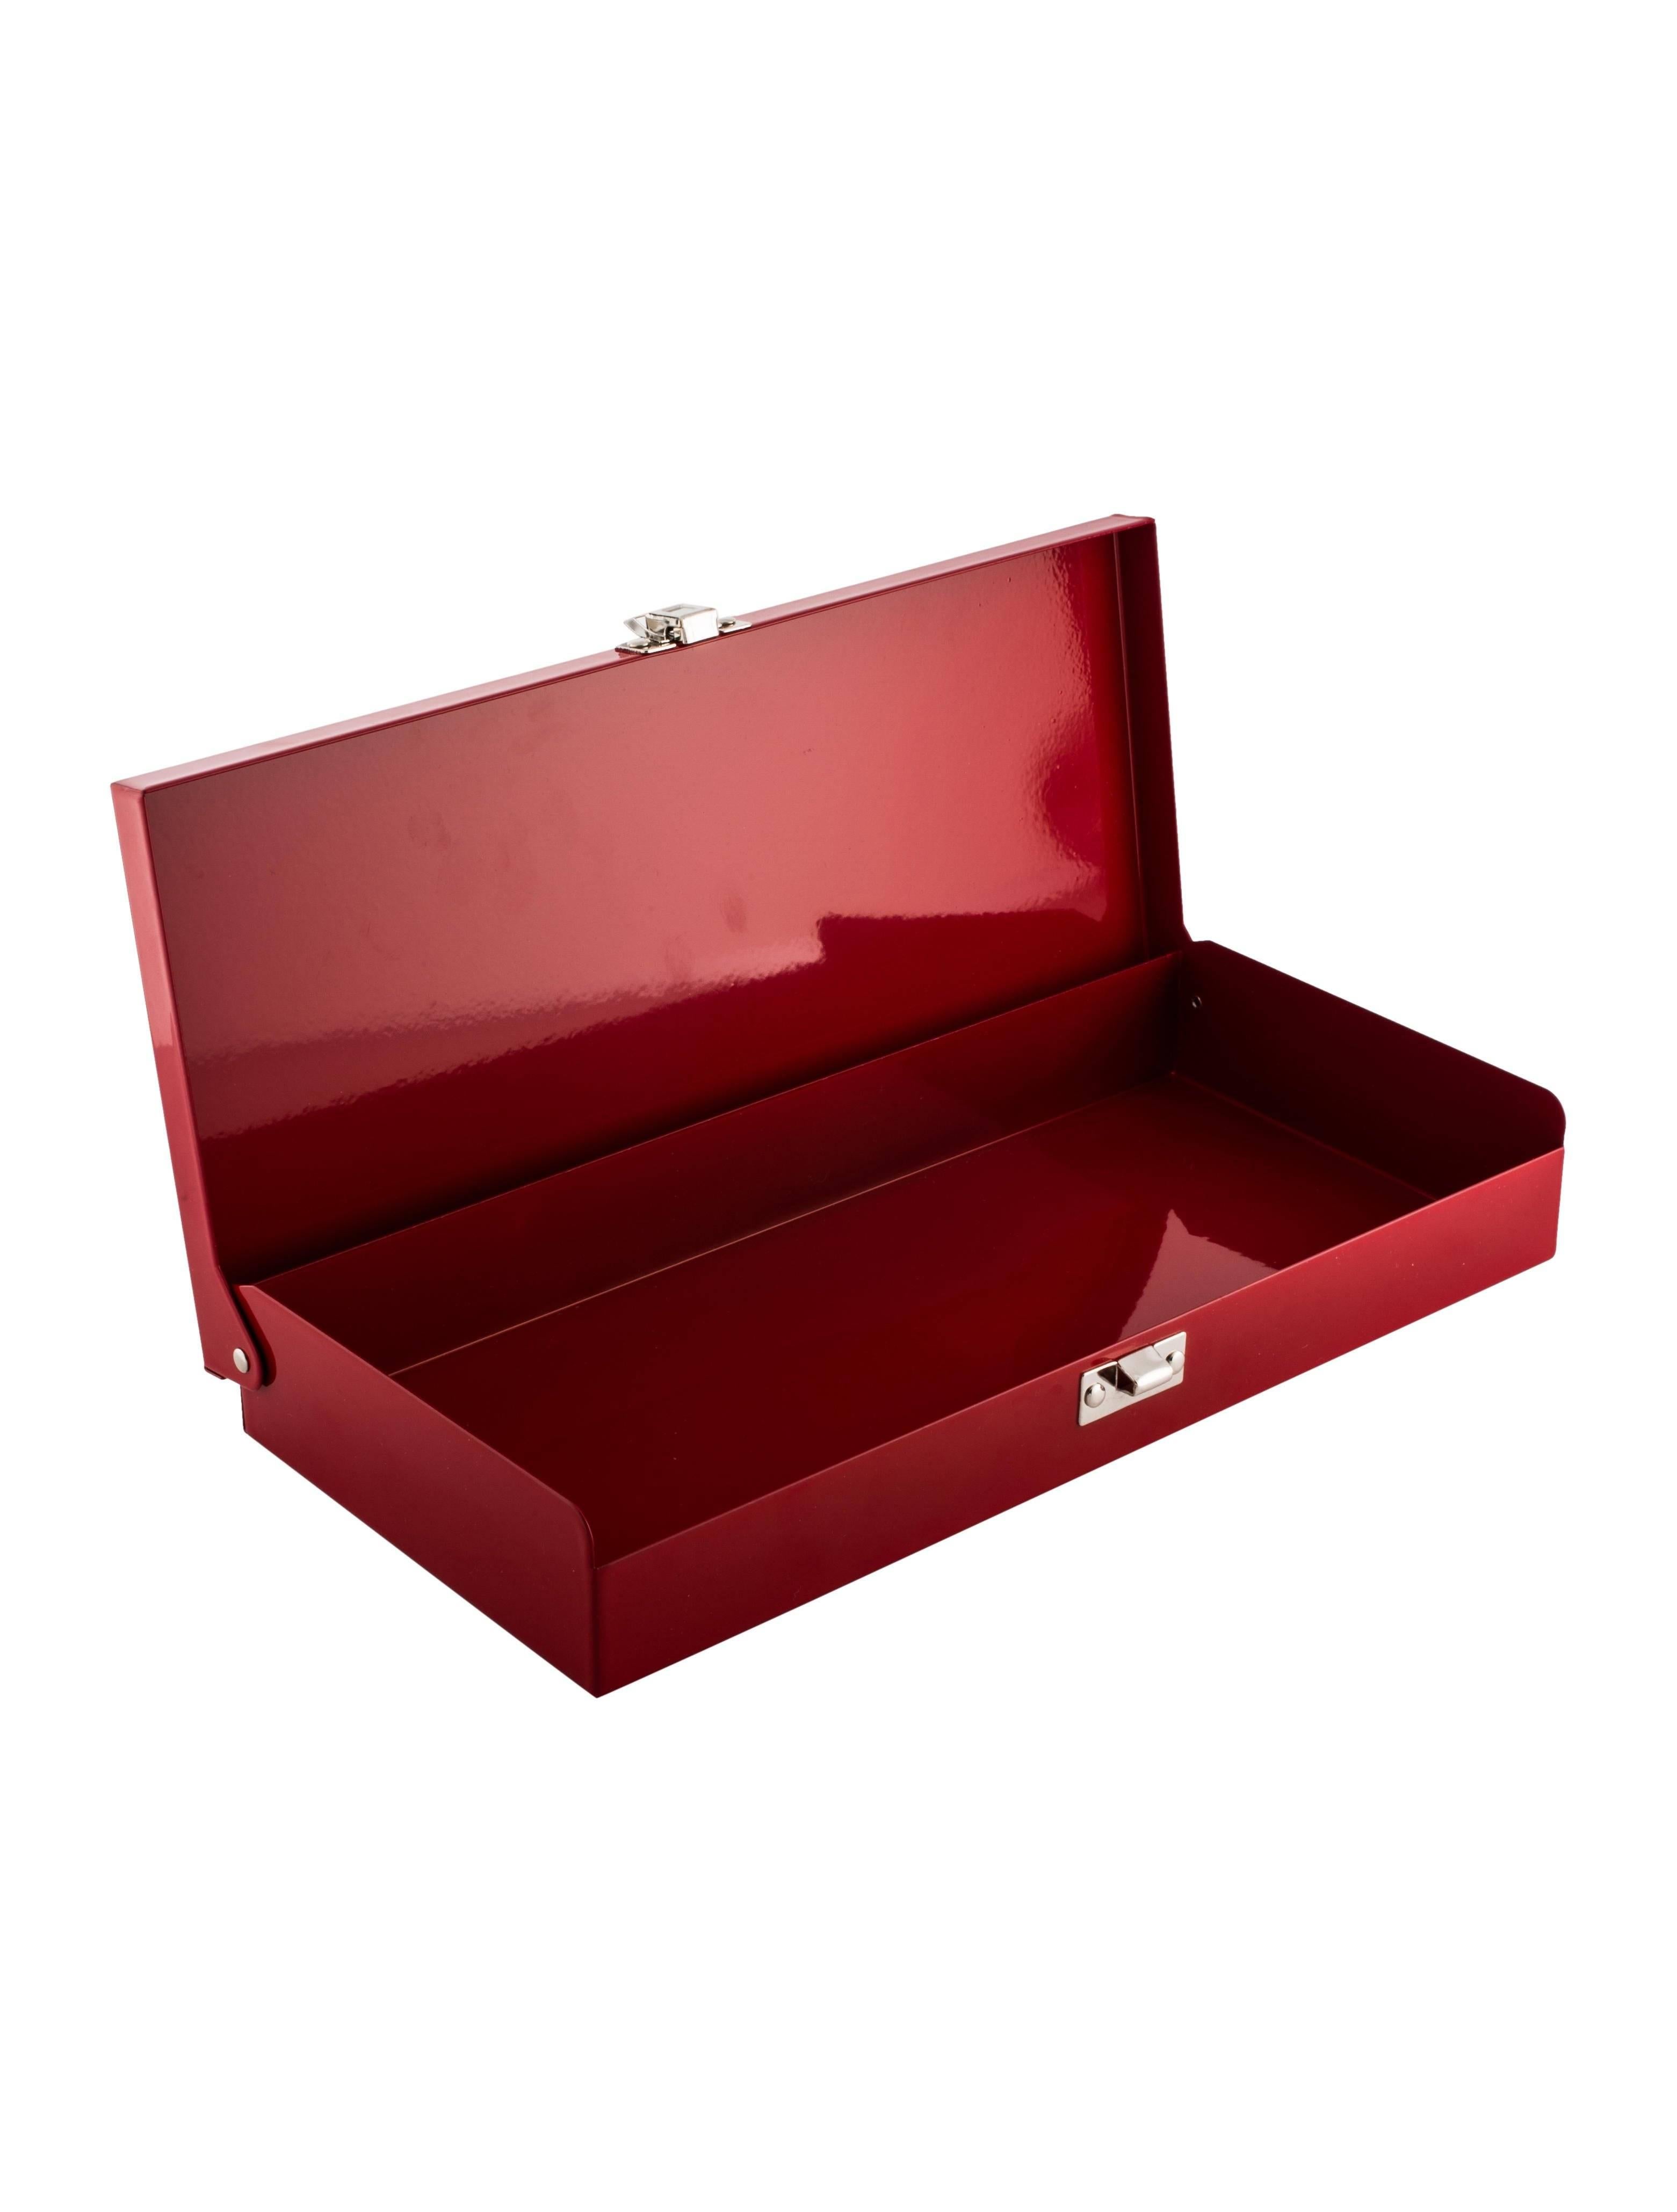 CURATOR'S NOTES

Supreme New Red Tool Box Men's Keepall Travel Decor Storage Keepsake Box Case

Metal
Silver tone hardware
Flip lock closure
Made in France
Measures 12.5